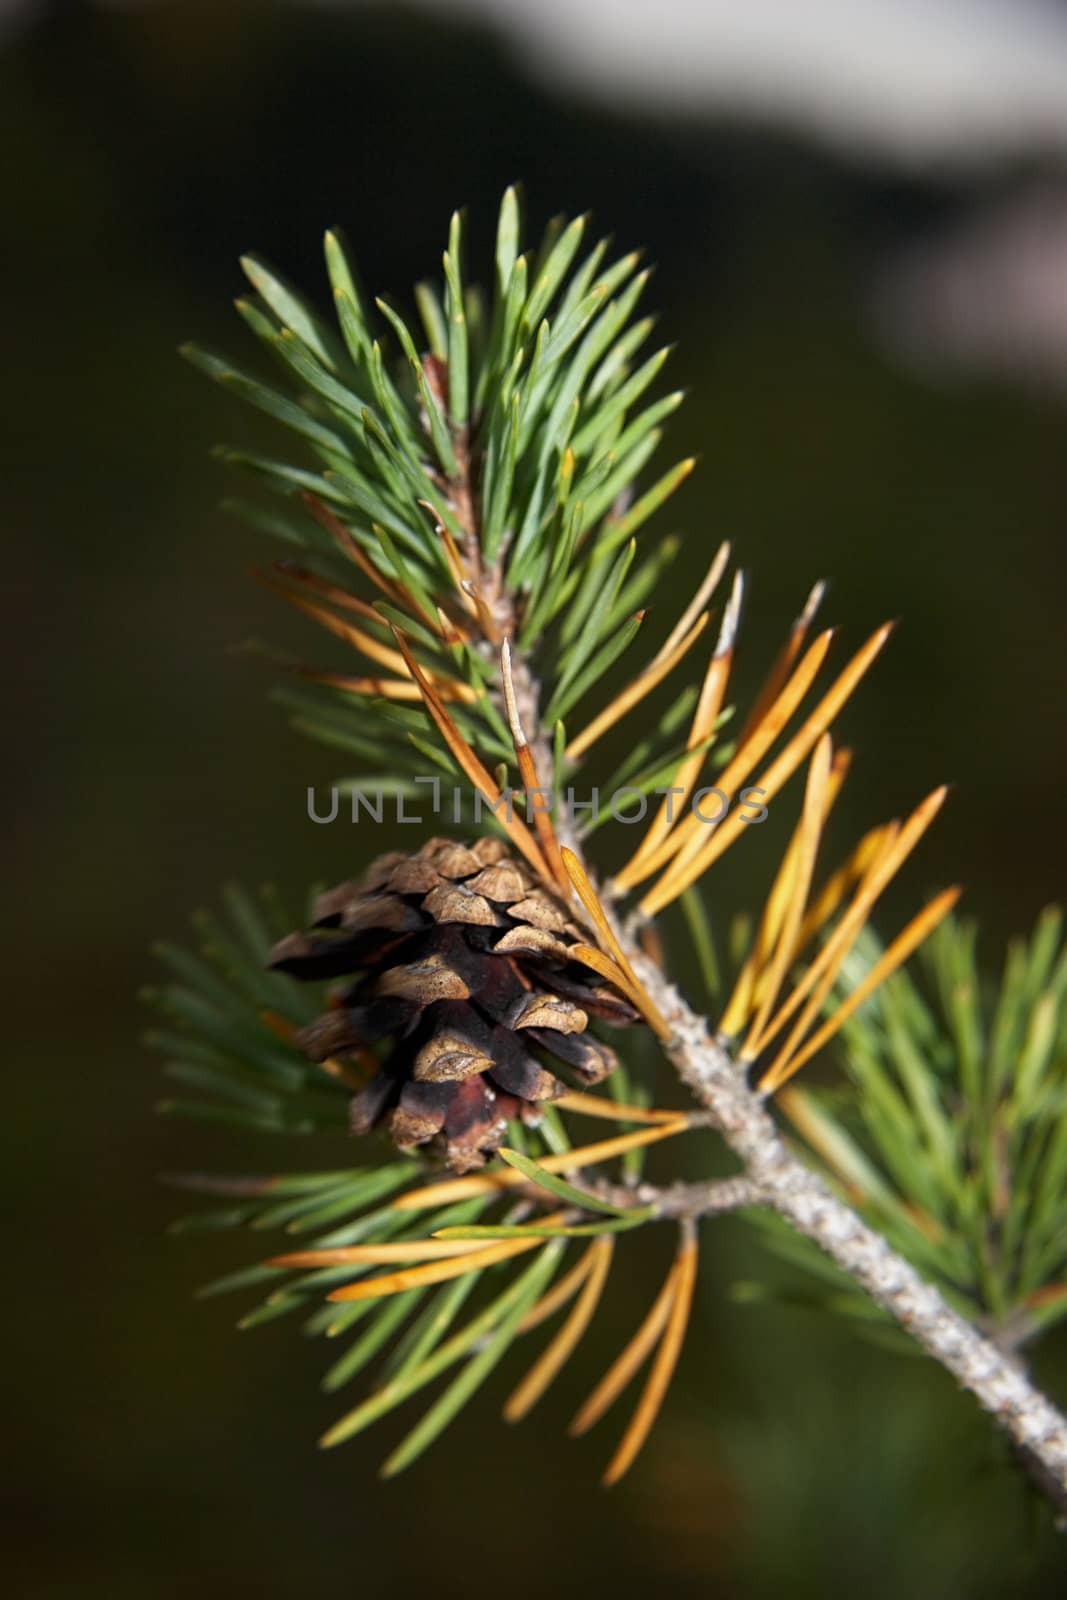 Closeup of pine branch with cone and green and yellow needles.